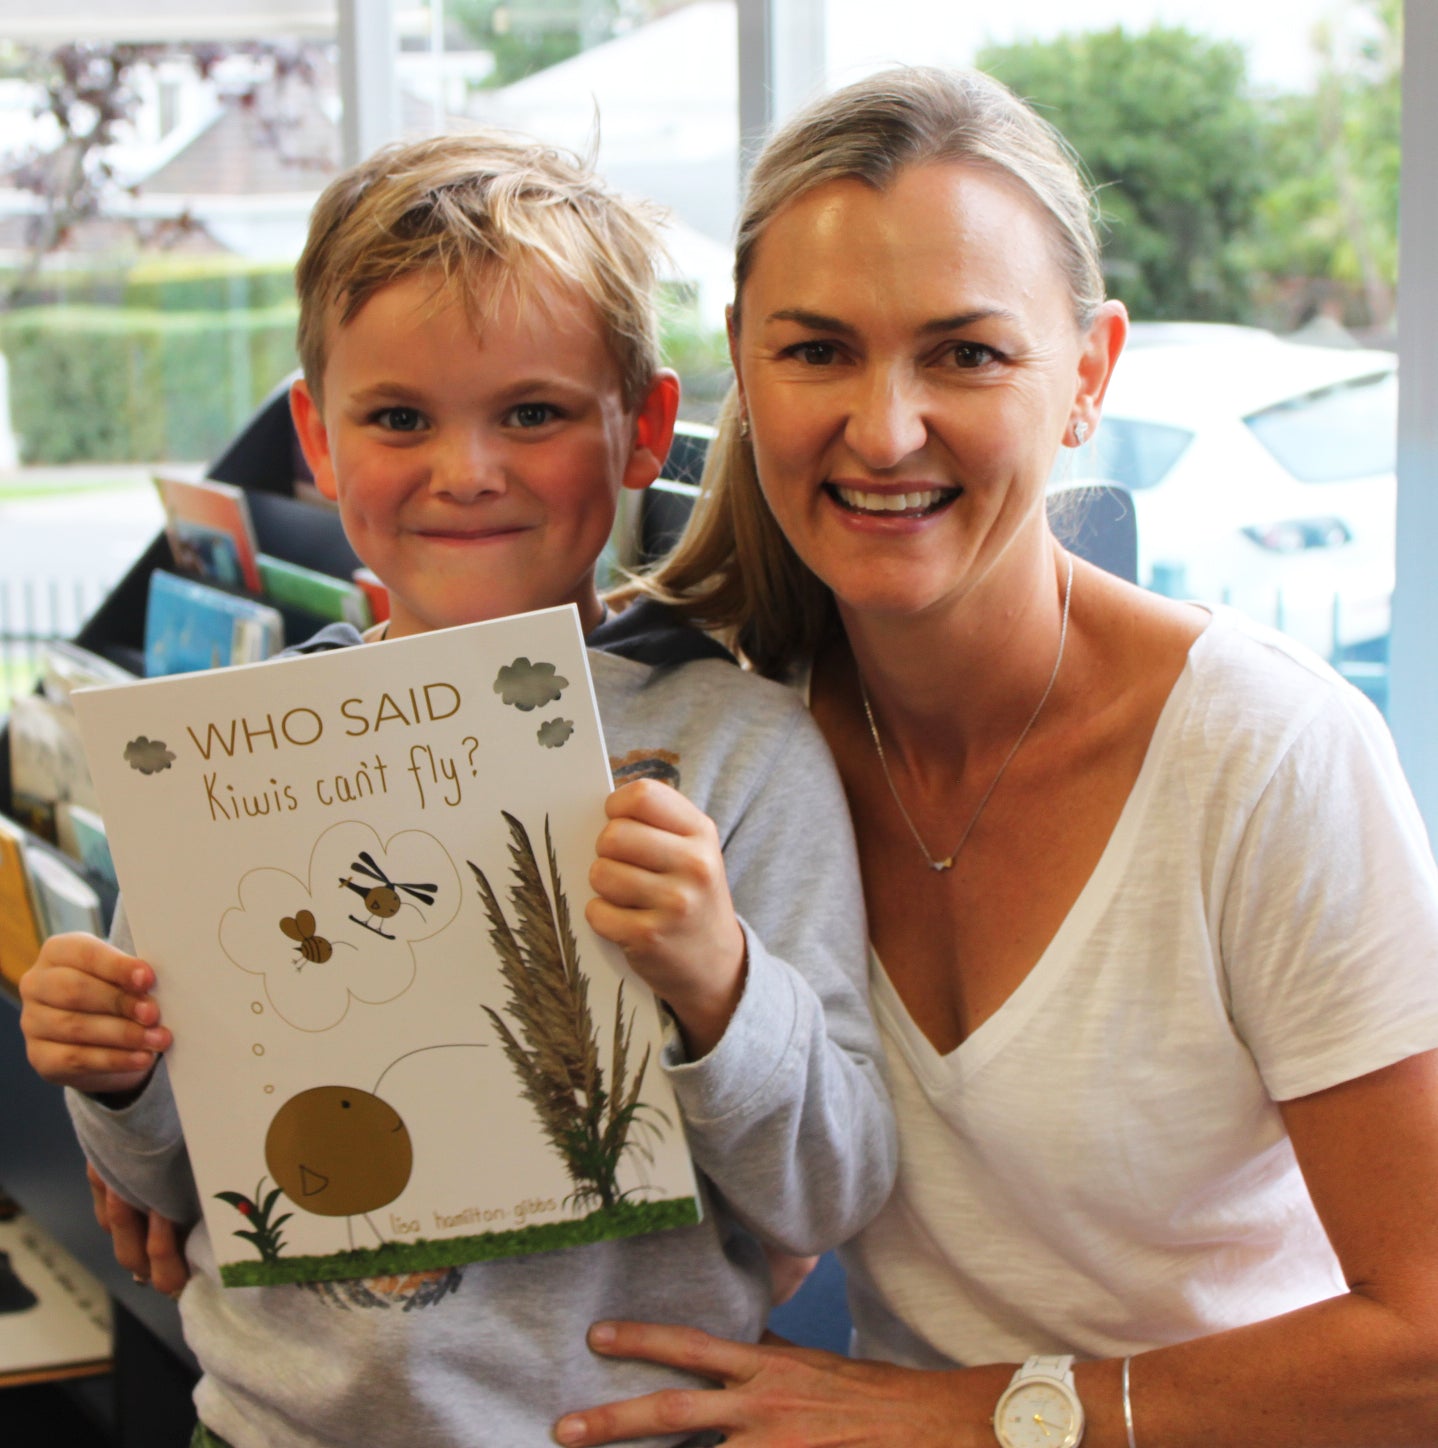 Little Kiwis review Who said Kiwis can't fly? children's book